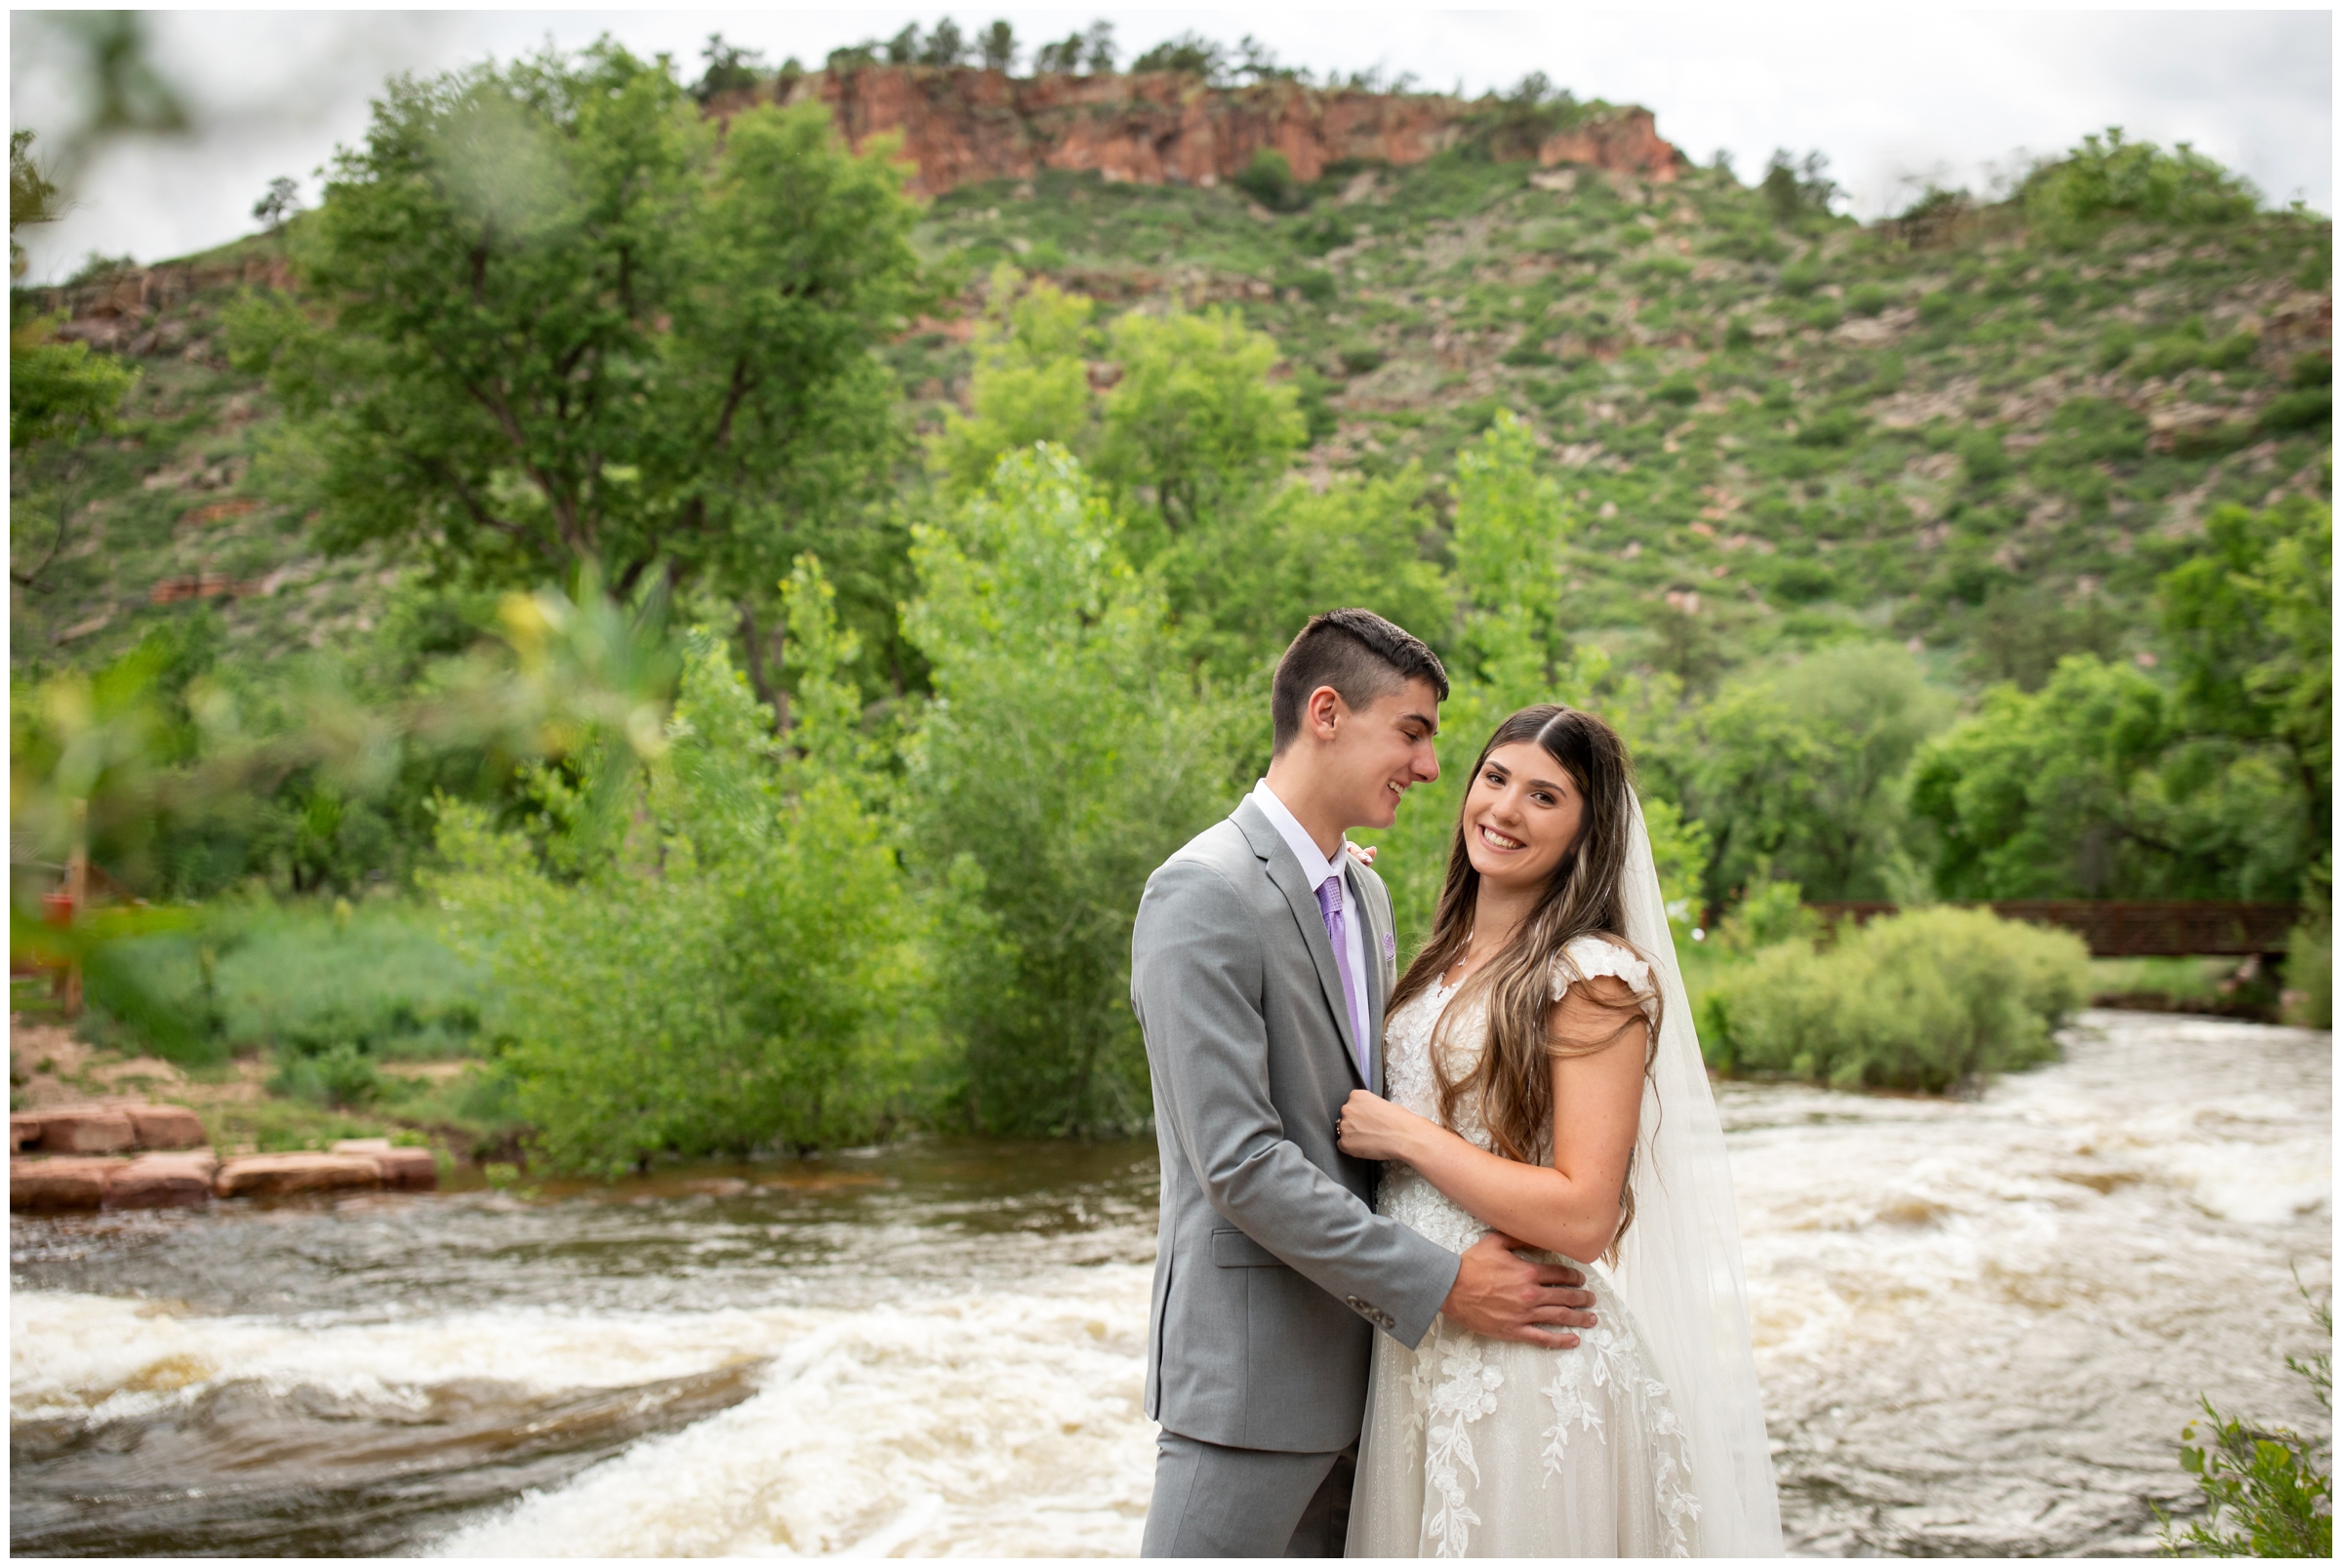 River Bend Colorado wedding portraits during summer by Lyons CO photographer Plum Pretty Photography